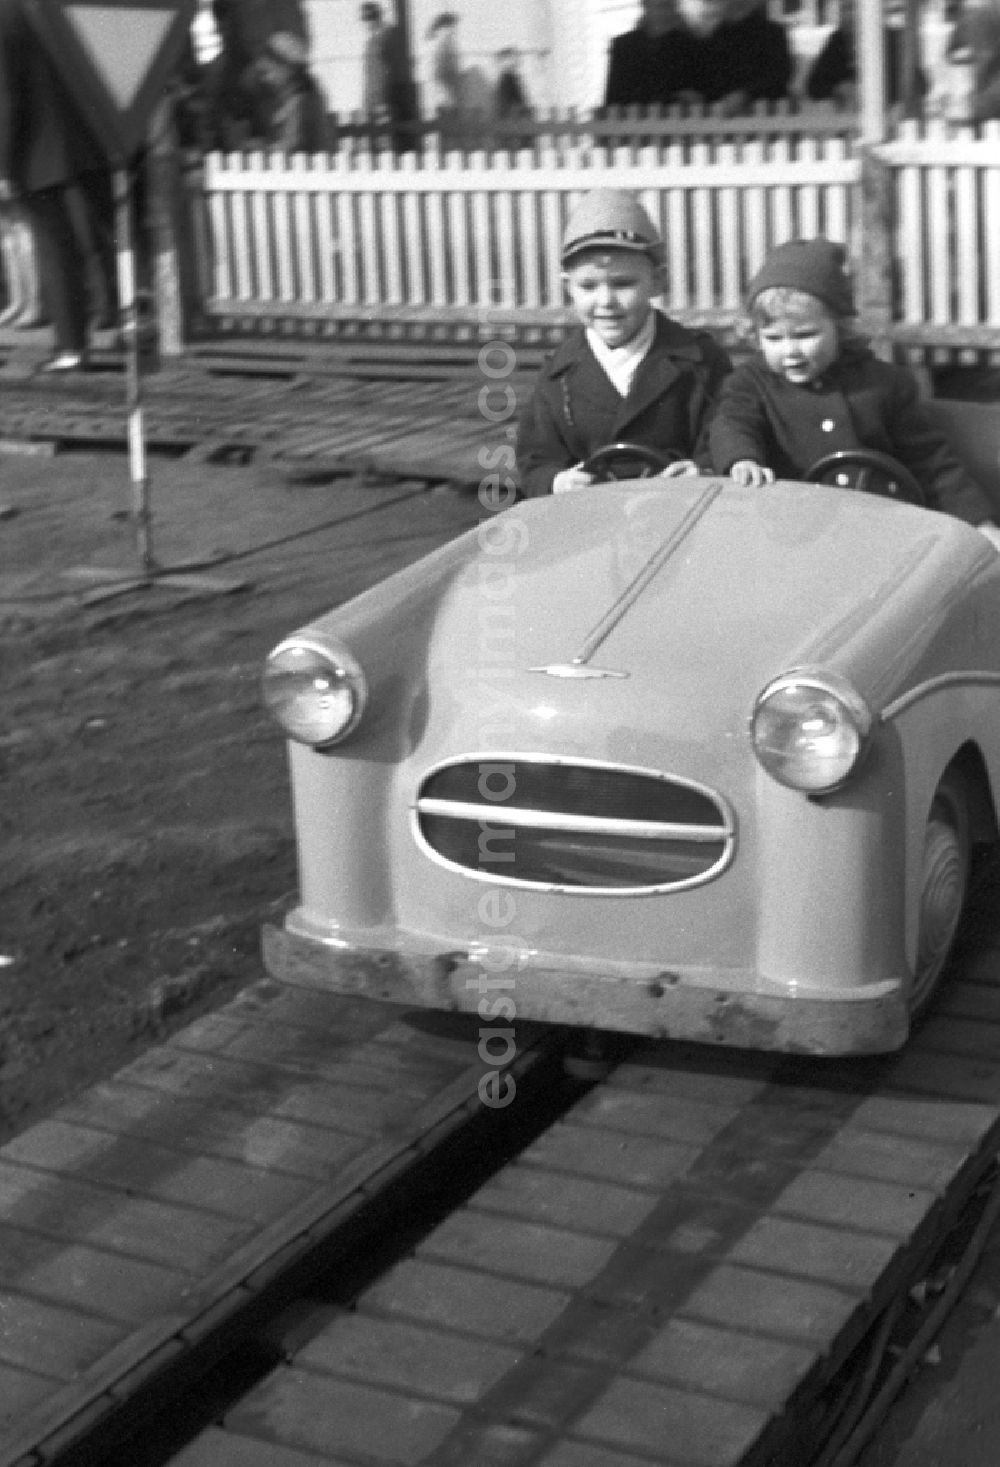 Magdeburg: Children at the fair. Here in a bumper car ride. The Magdeburg Spring Fair, a three-week frenzy early spring, takes place annually at the Exhibition Place Max Wille at the Small Town march right on the banks of the Elbe